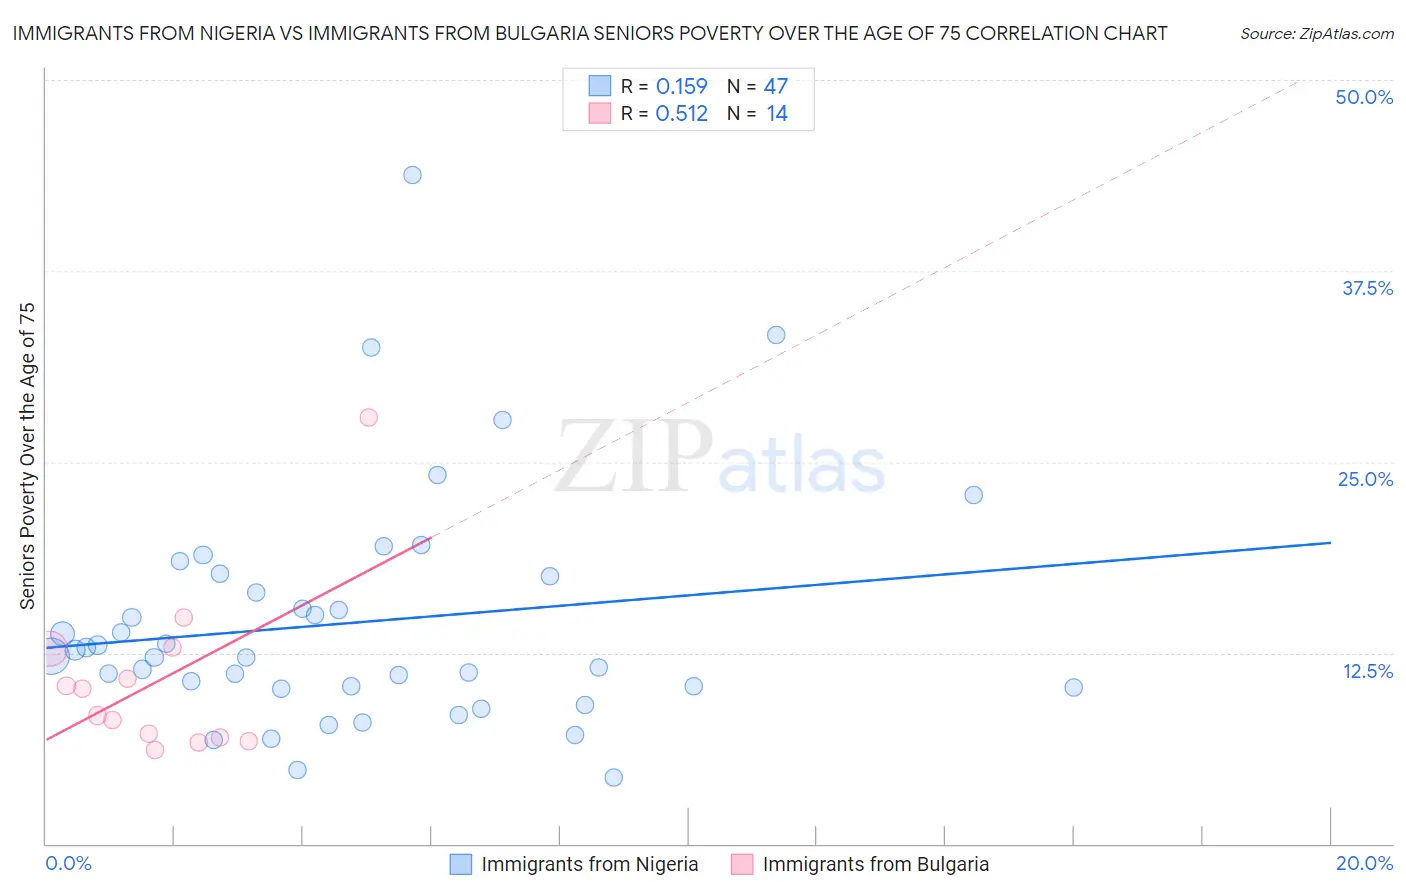 Immigrants from Nigeria vs Immigrants from Bulgaria Seniors Poverty Over the Age of 75